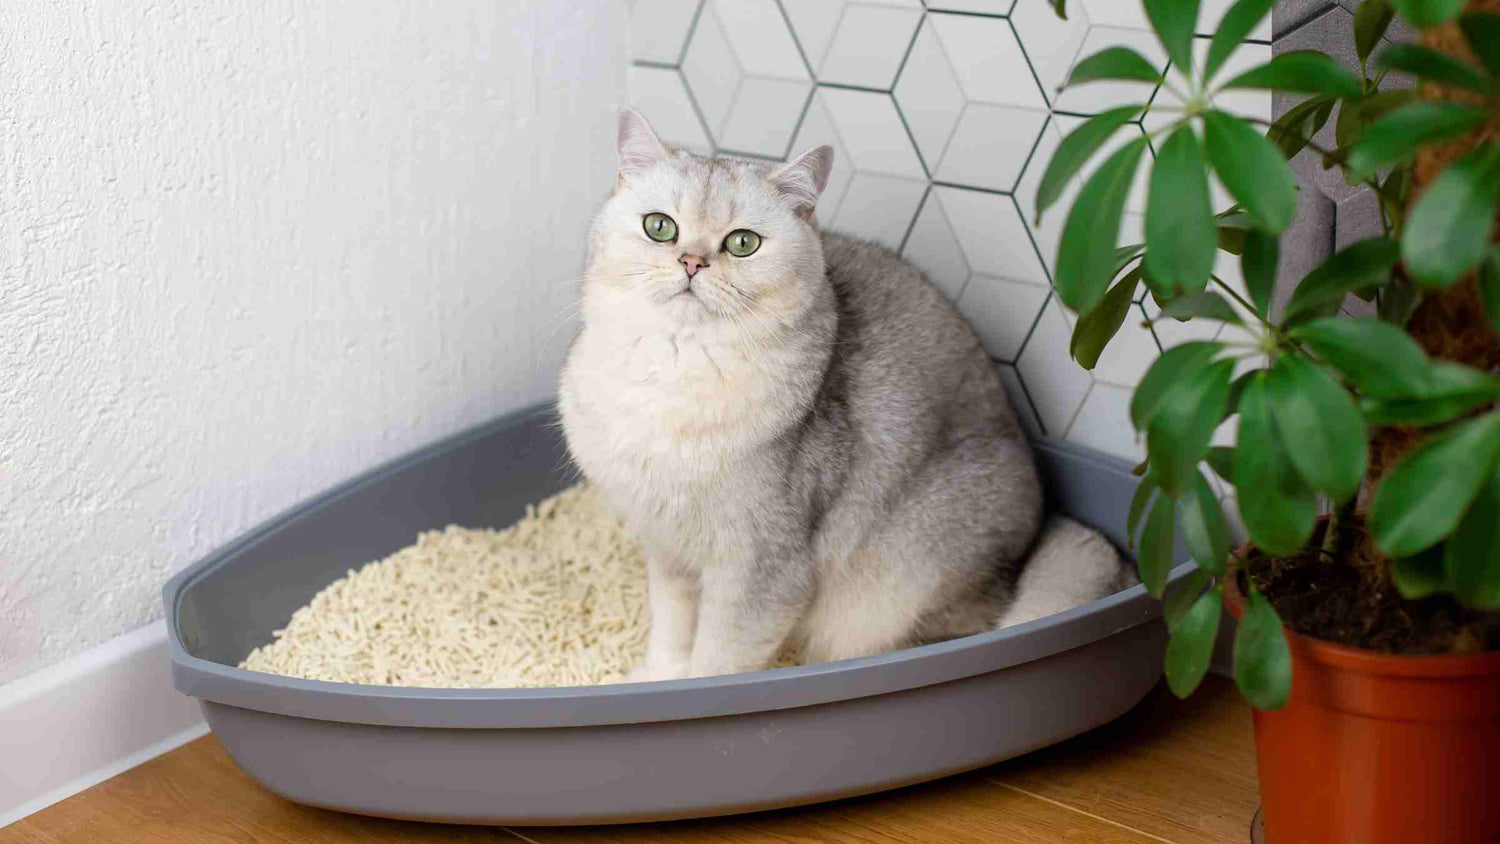 Elegant white cat with green eyes sitting in a grey litter box with SoyKitty’s eco-friendly litter, next to a potted plant.